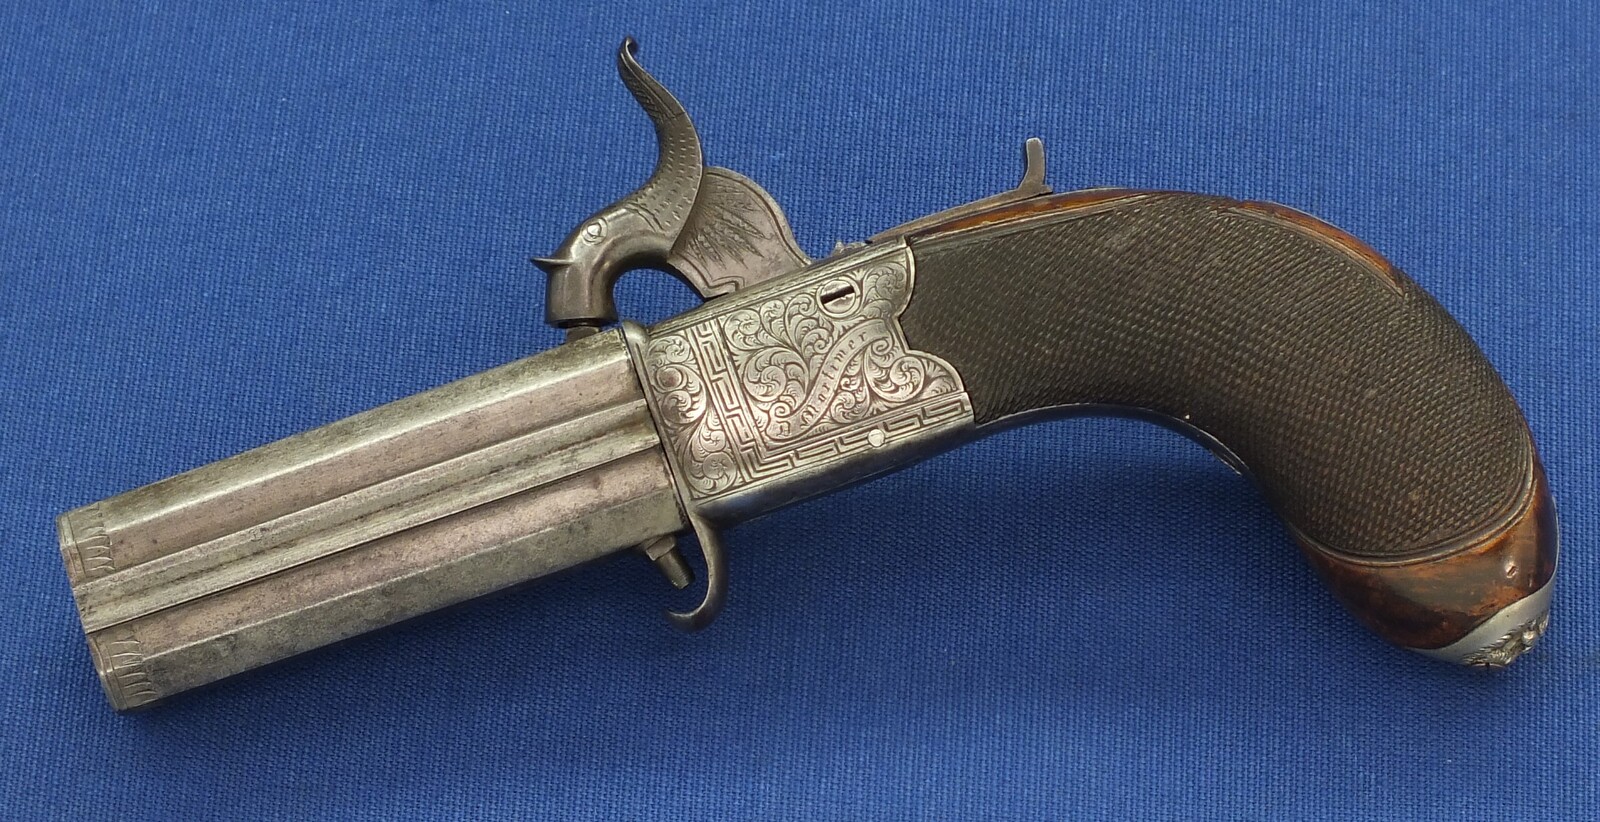 An English Percussion Wender pistol with thumbpiece safety catch by D.Mortimer London. Caliber 9,5mm. Length 19cm. In very good condition. Price 950 euro